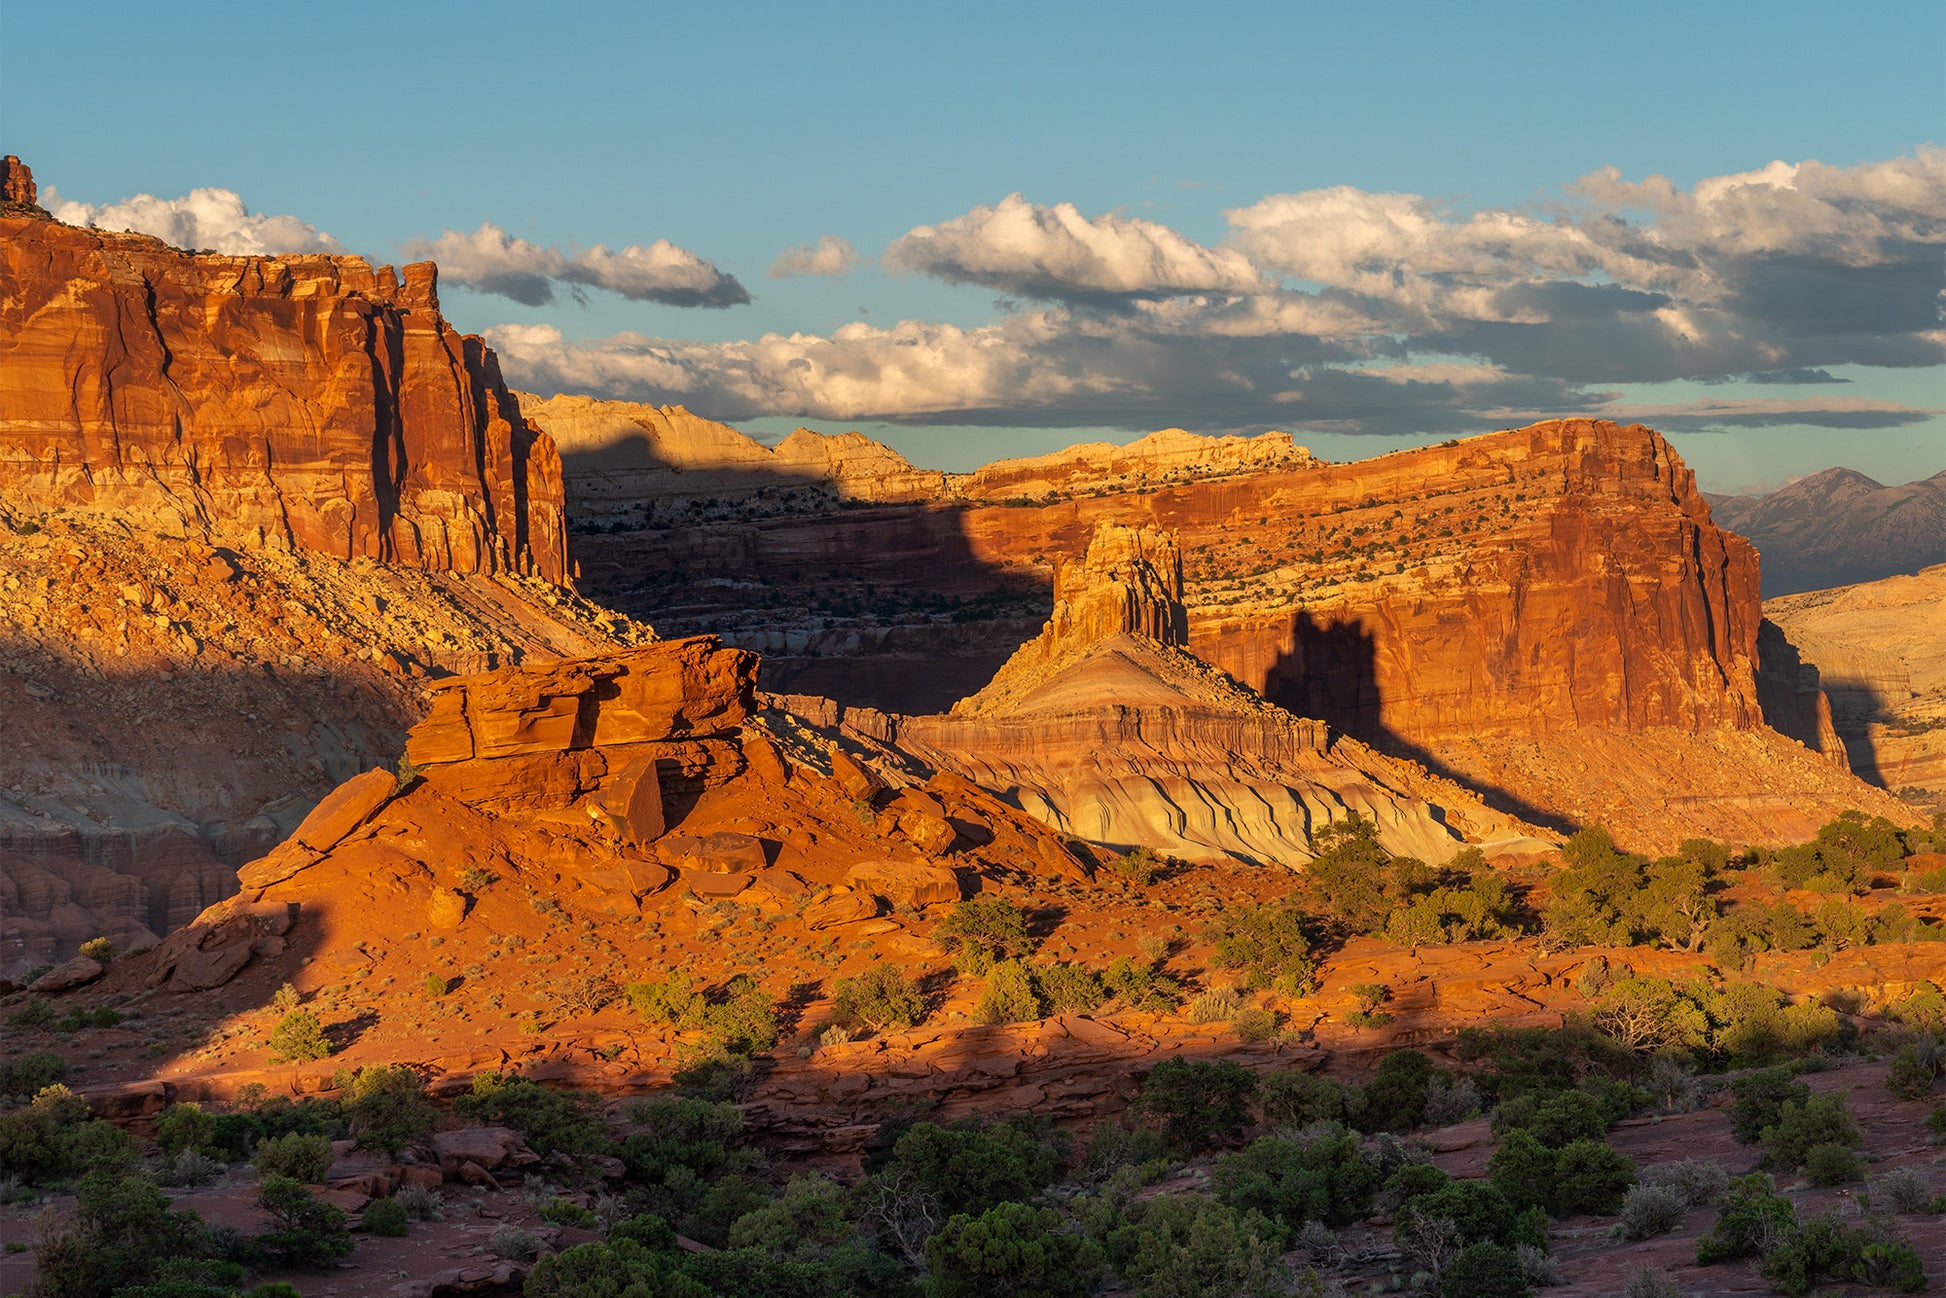 The setting sun highlights the red and white sandstone cliffs and outcrops at Capitol Reef National Park.  I love how the setting sun intensifies the colors of the cliffs in this fine art landscape print!